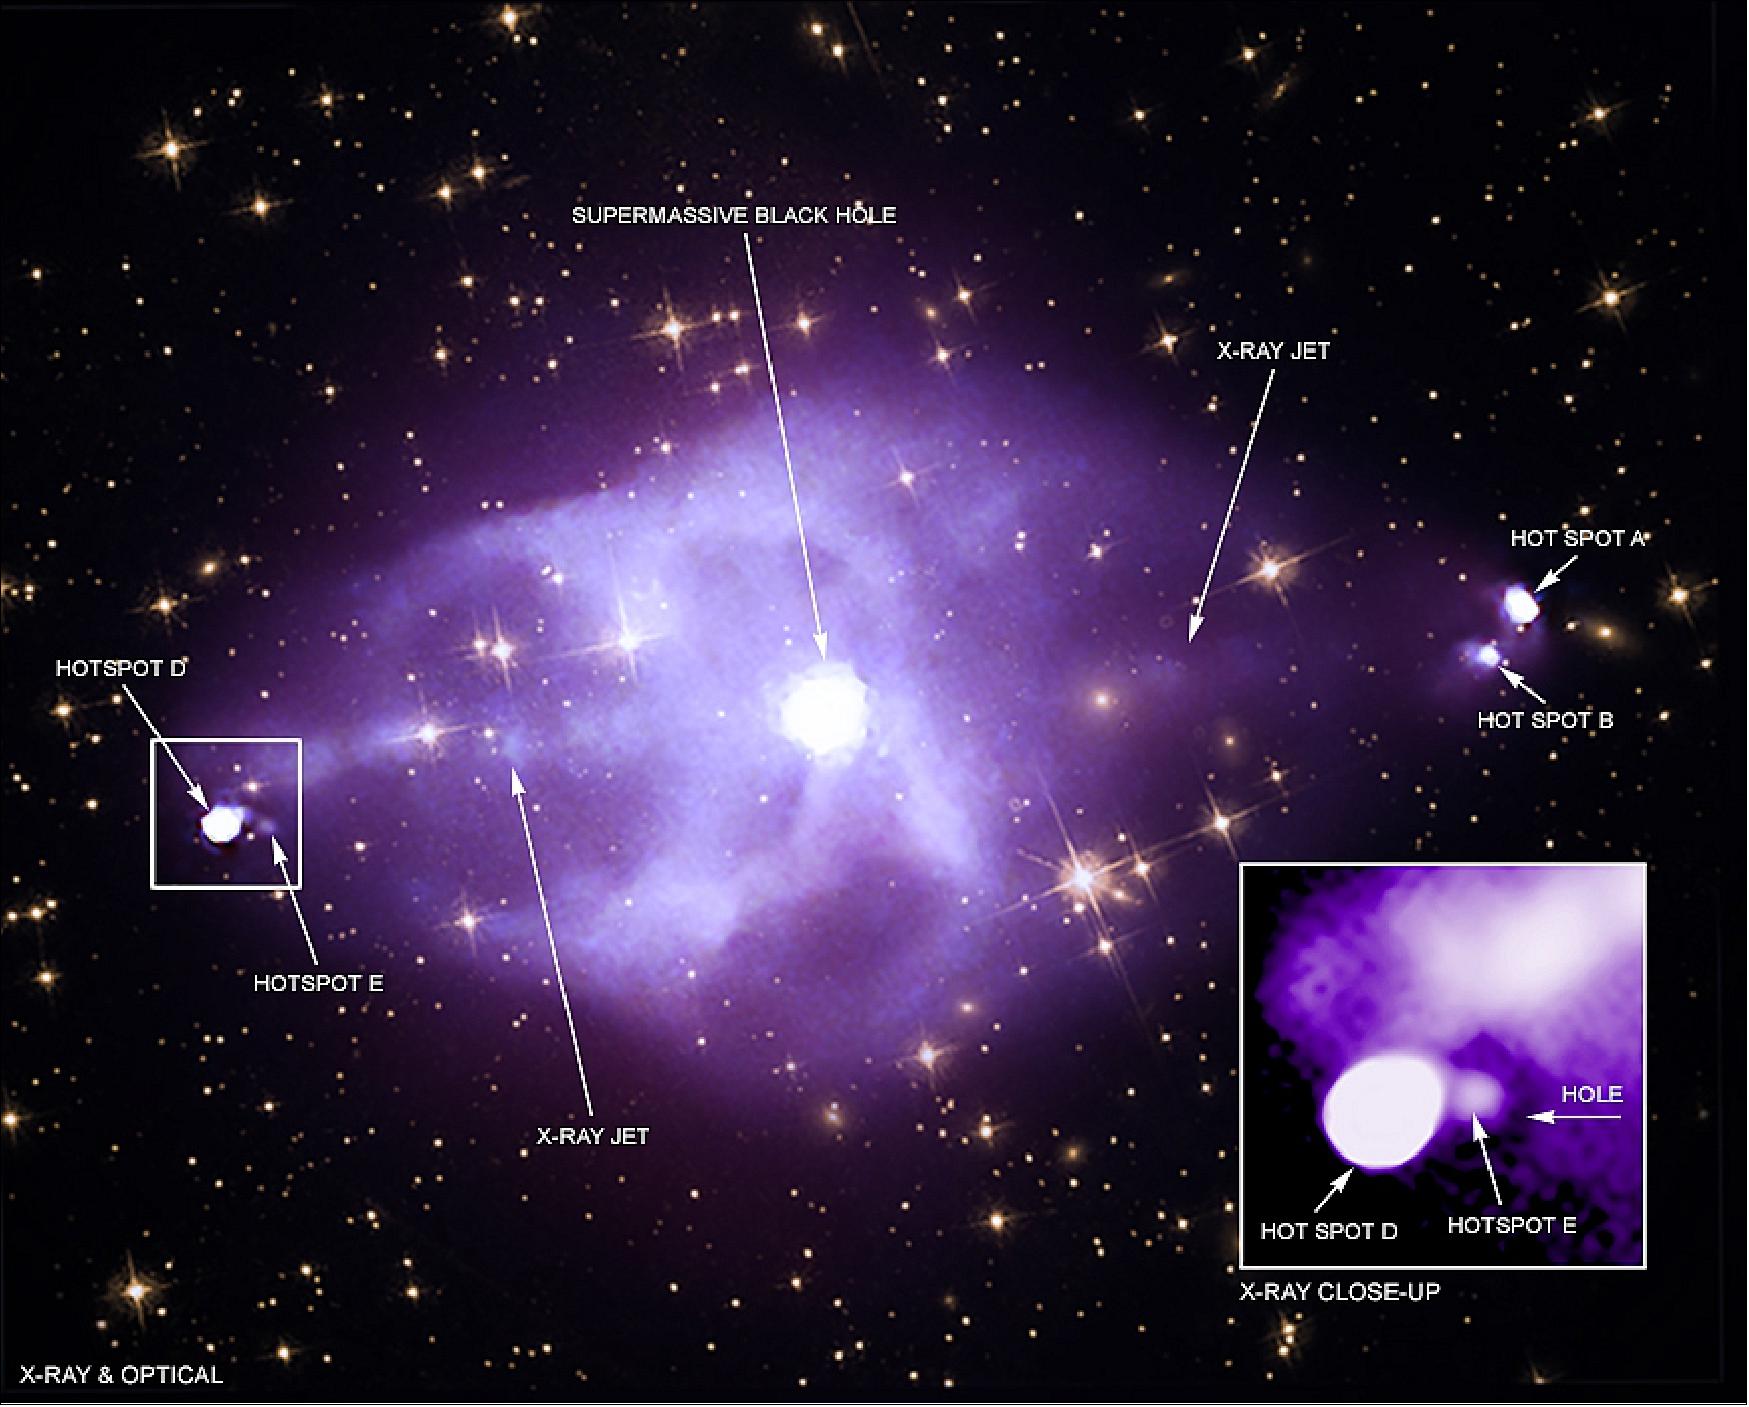 Figure 45: X-ray and optical composite. A ricocheting jet blasting from a giant black hole has been captured by Chandra. These images of Cygnus A show X-rays from Chandra and an optical view from Hubble of the galaxies and stars in the same field of view. Chandra's data reveal the presence of a powerful jet of particles and electromagnetic energy that has shot out from the black hole and slammed into a wall of hot gas, then ricocheted to punch a hole in a cloud of energetic particles, before it collides with another part of the gas wall (image credit: X-ray: NASA/CXC/Columbia Univ./A. Johnson et al.; Optical: NASA/STScI)